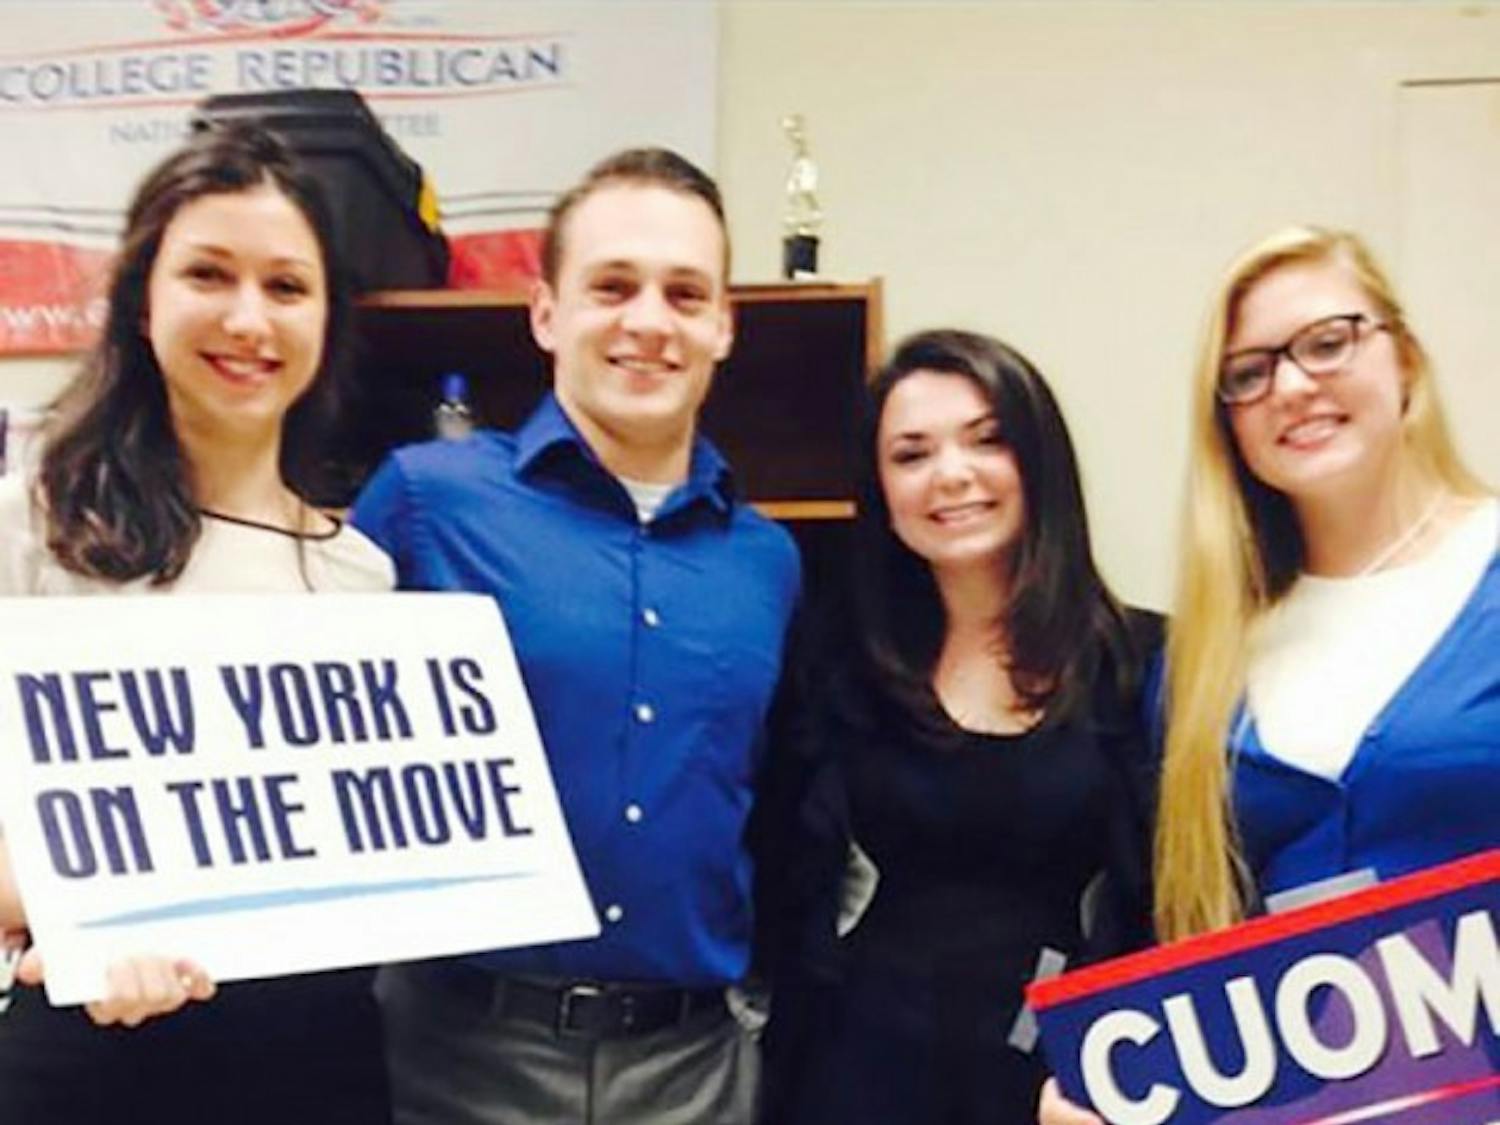 Laura Mannara (far left), president of College Democrats,&nbsp;
went with other members in her club (Sean Kaczmarek, Melissa Kathan,&nbsp;
and Carly Gottorff) to watch the gubernatorial debate watch party for&nbsp;
Gov. Andrew Cuomo.&nbsp;Curtosy of Laura Mannara